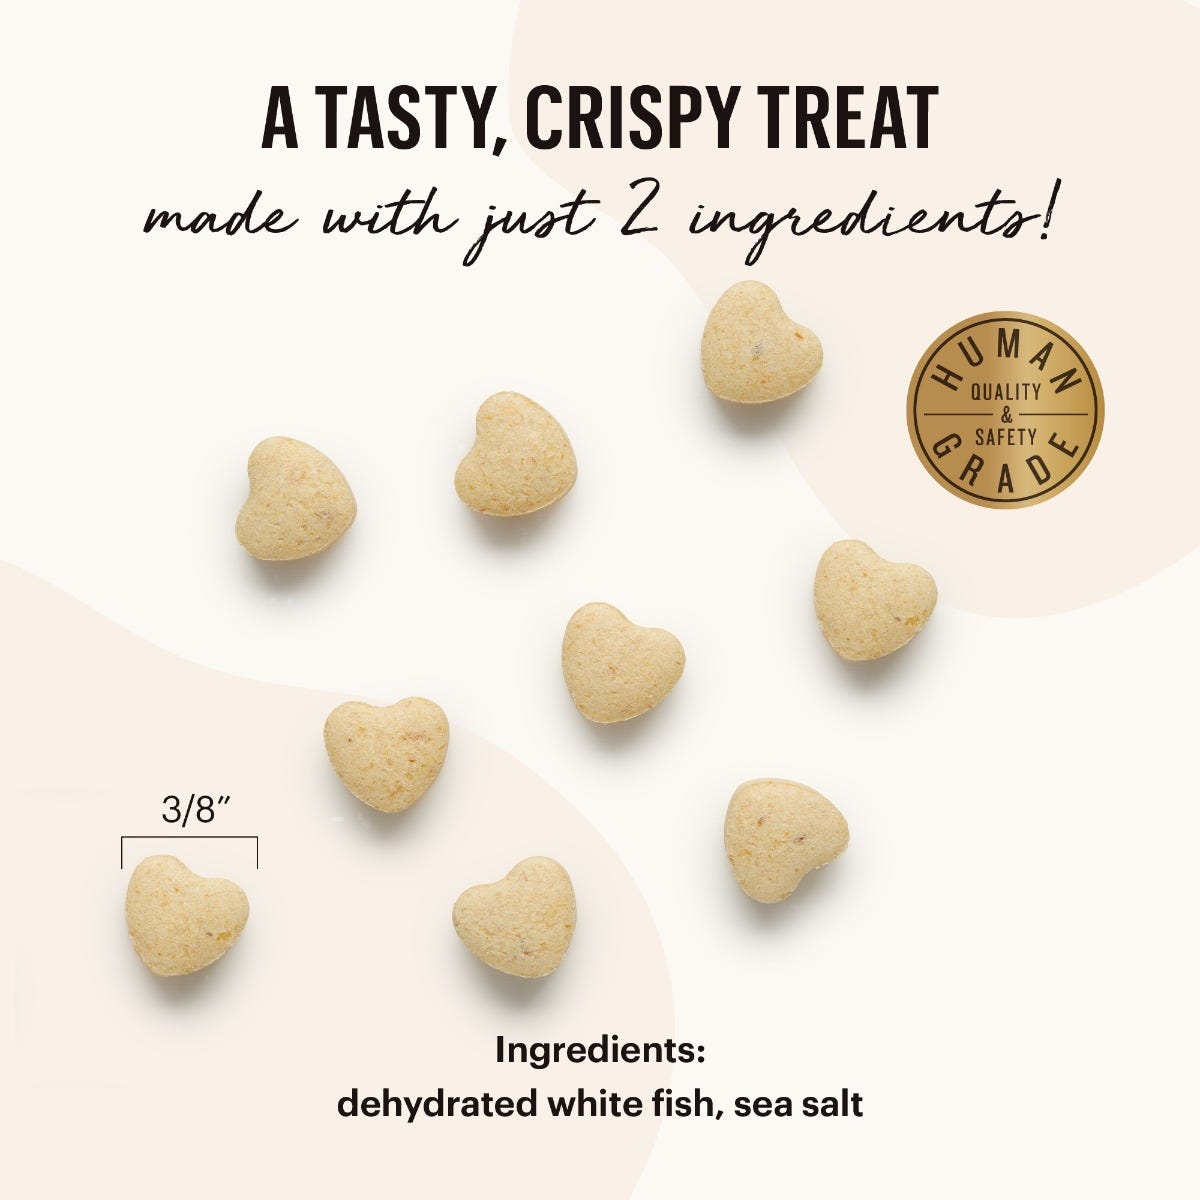 The Honest Kitchen Smittens: Heart-Shaped Whitefish Treats for Cats